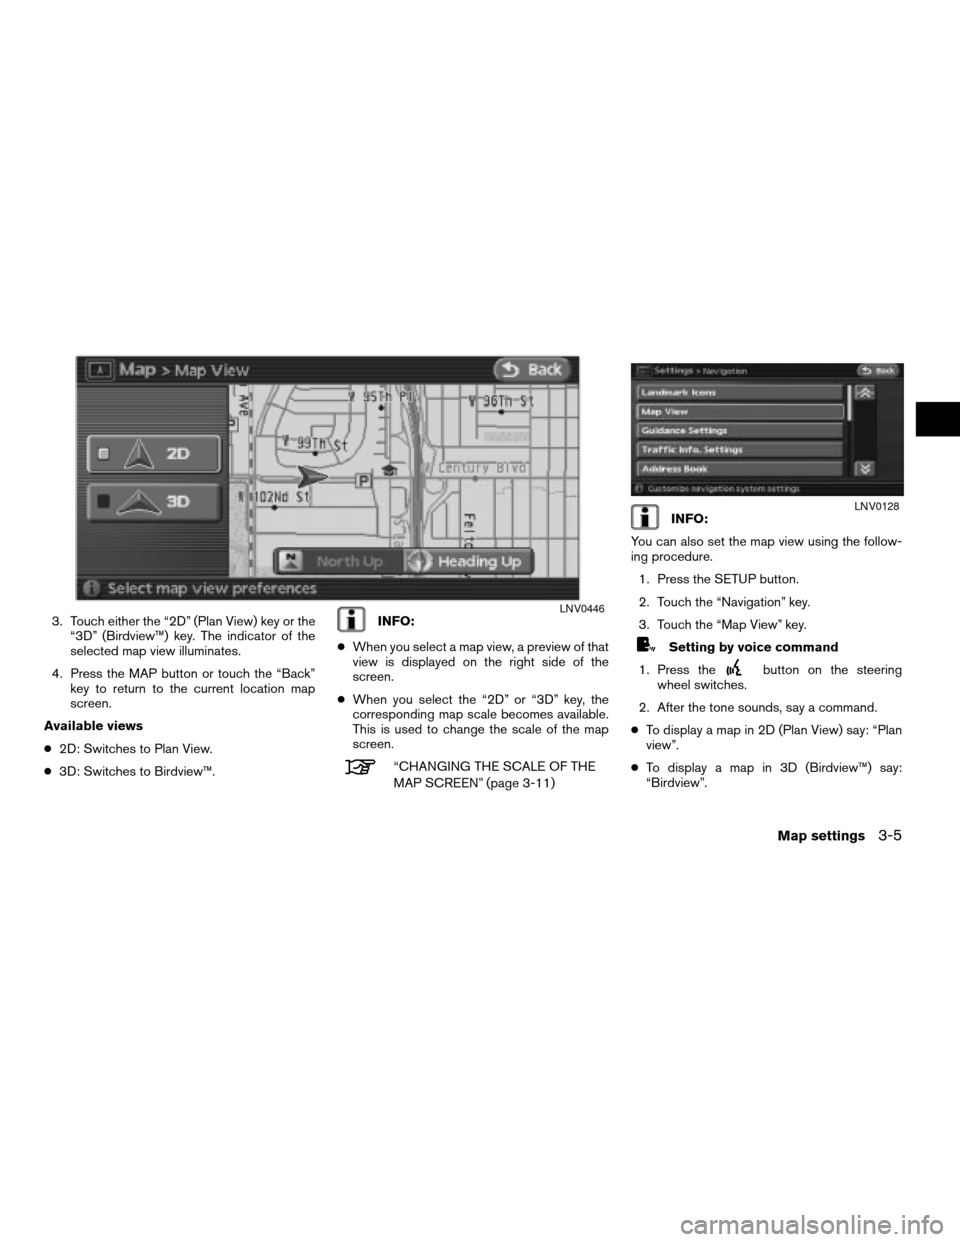 NISSAN ALTIMA HYBRID 2008 L32A / 4.G Navigation Manual 3. Touch either the “2D” (Plan View) key or the
“3D” (Birdview™) key. The indicator of the
selected map view illuminates.
4. Press the MAP button or touch the “Back”
key to return to the